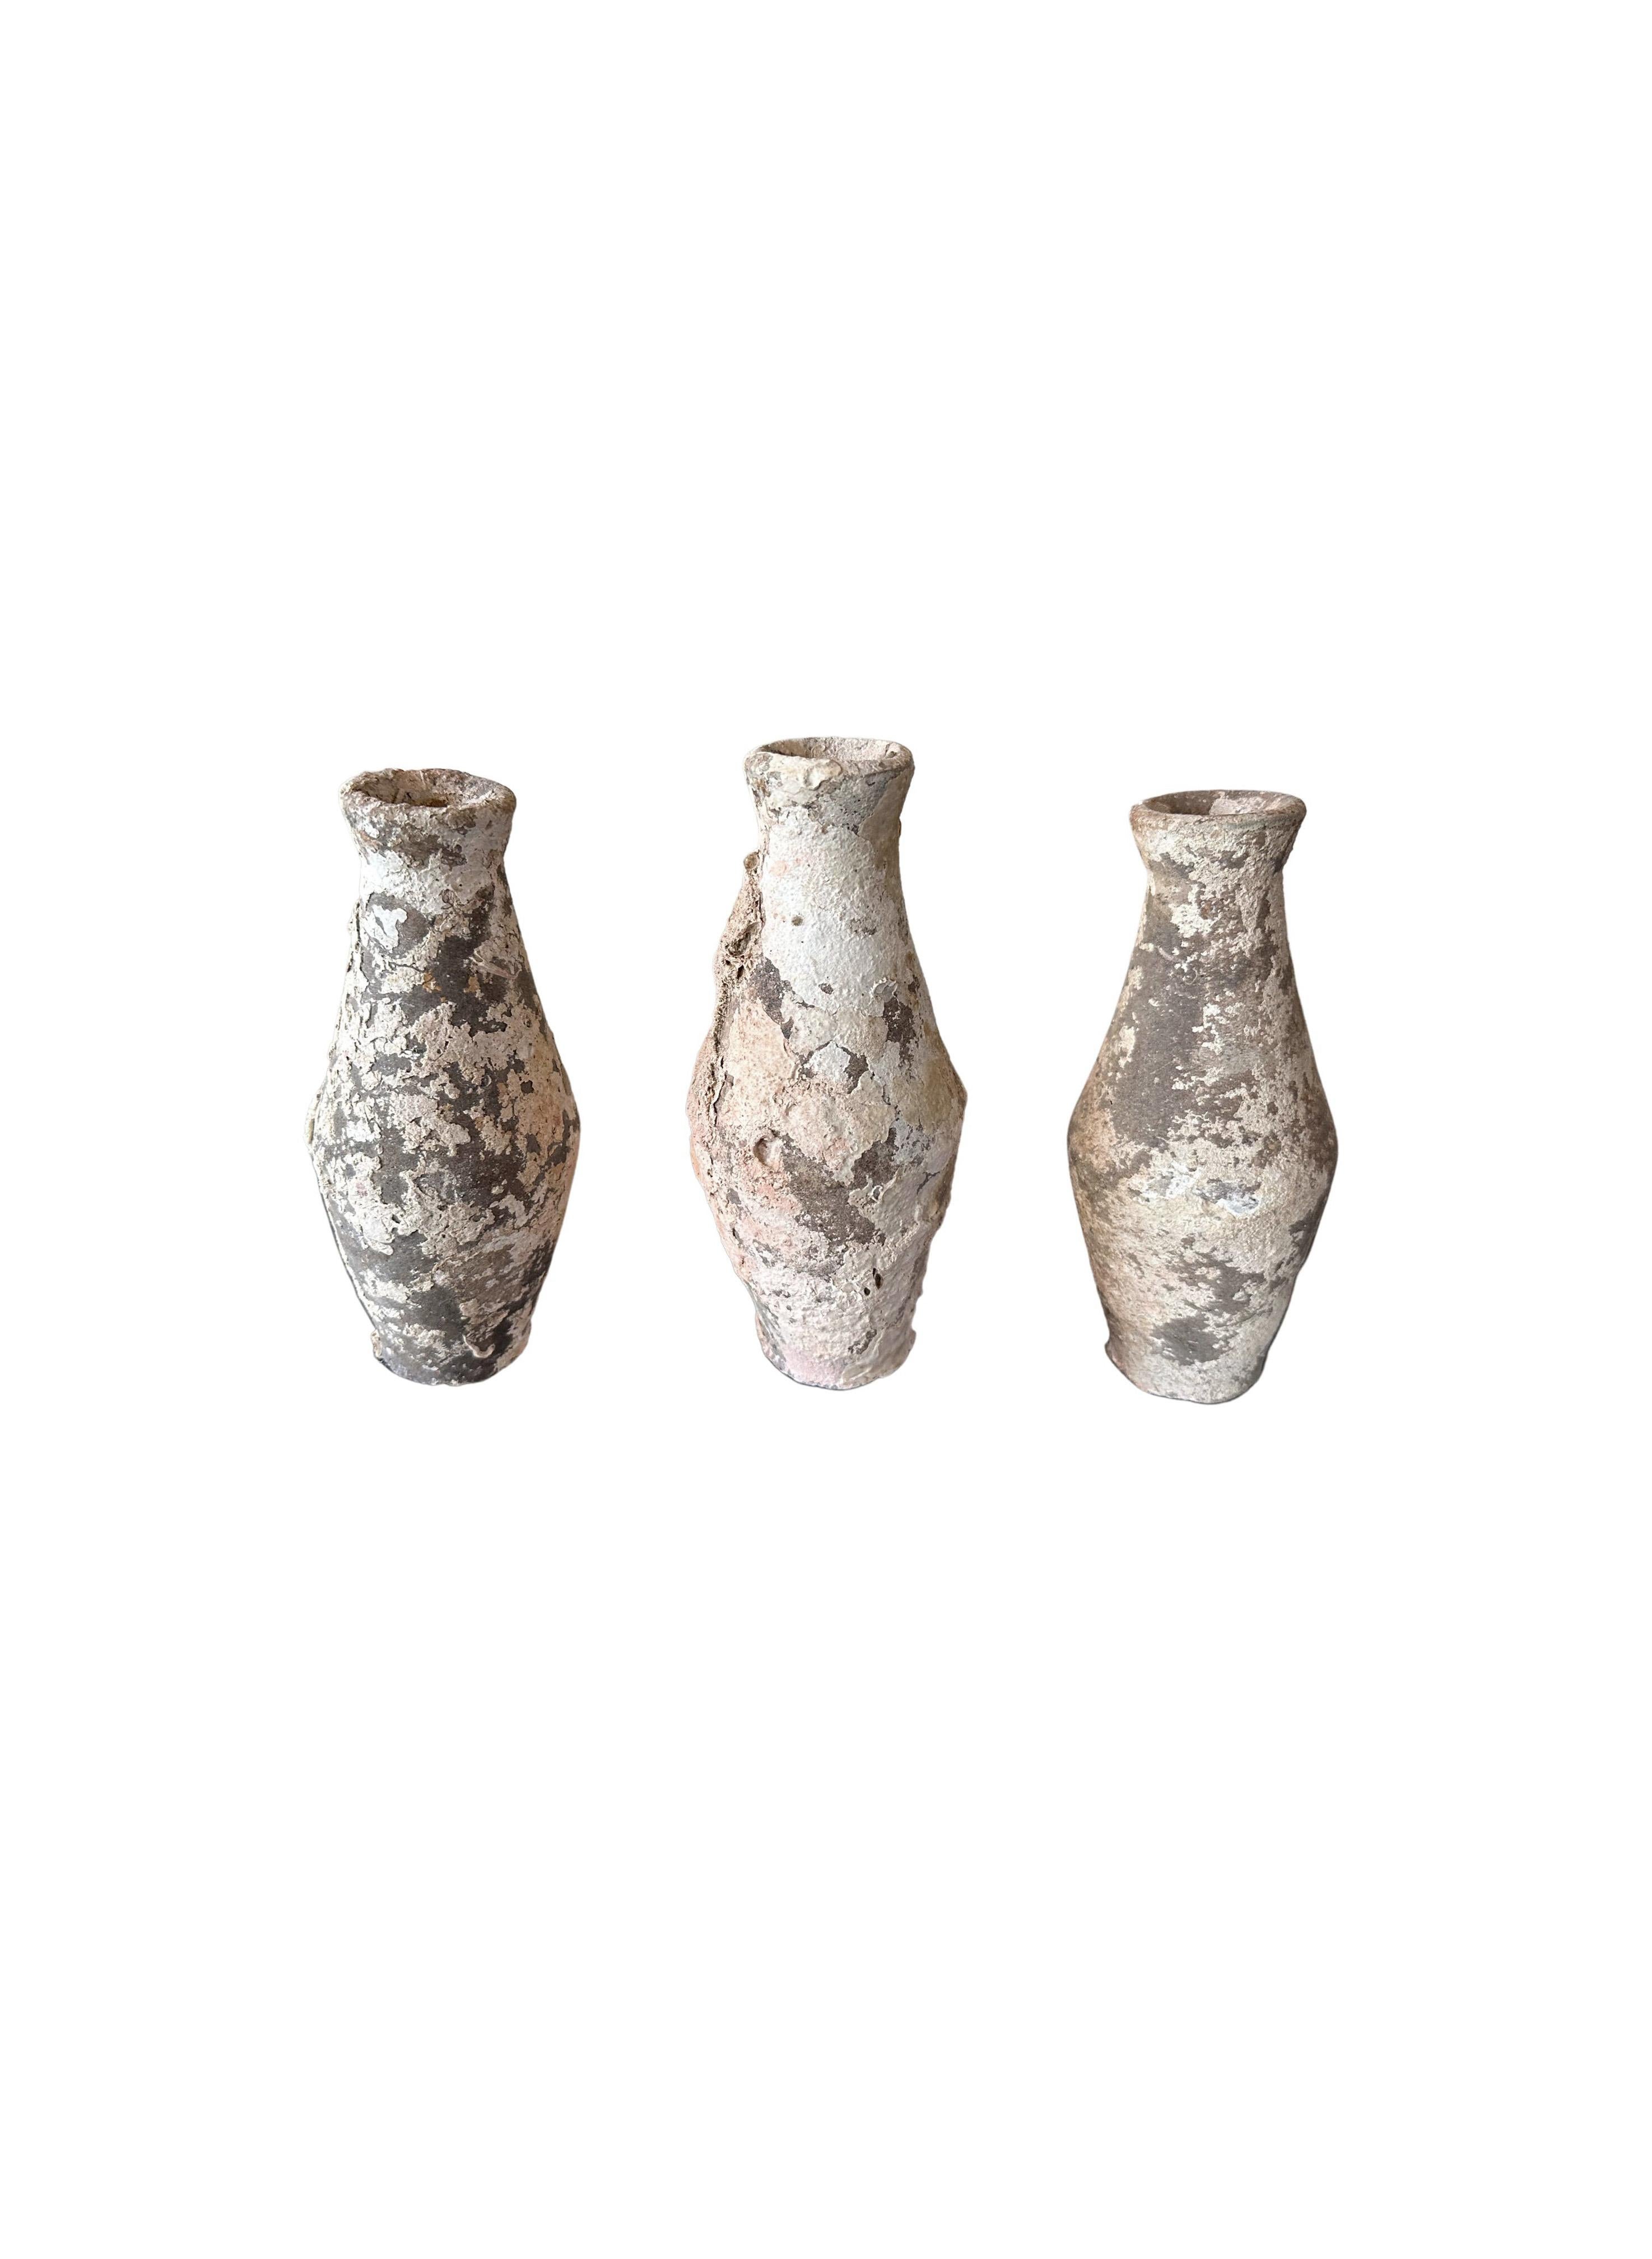 Indonesian Set of Shipwreck Bottles from Indonesia c. 1600 For Sale